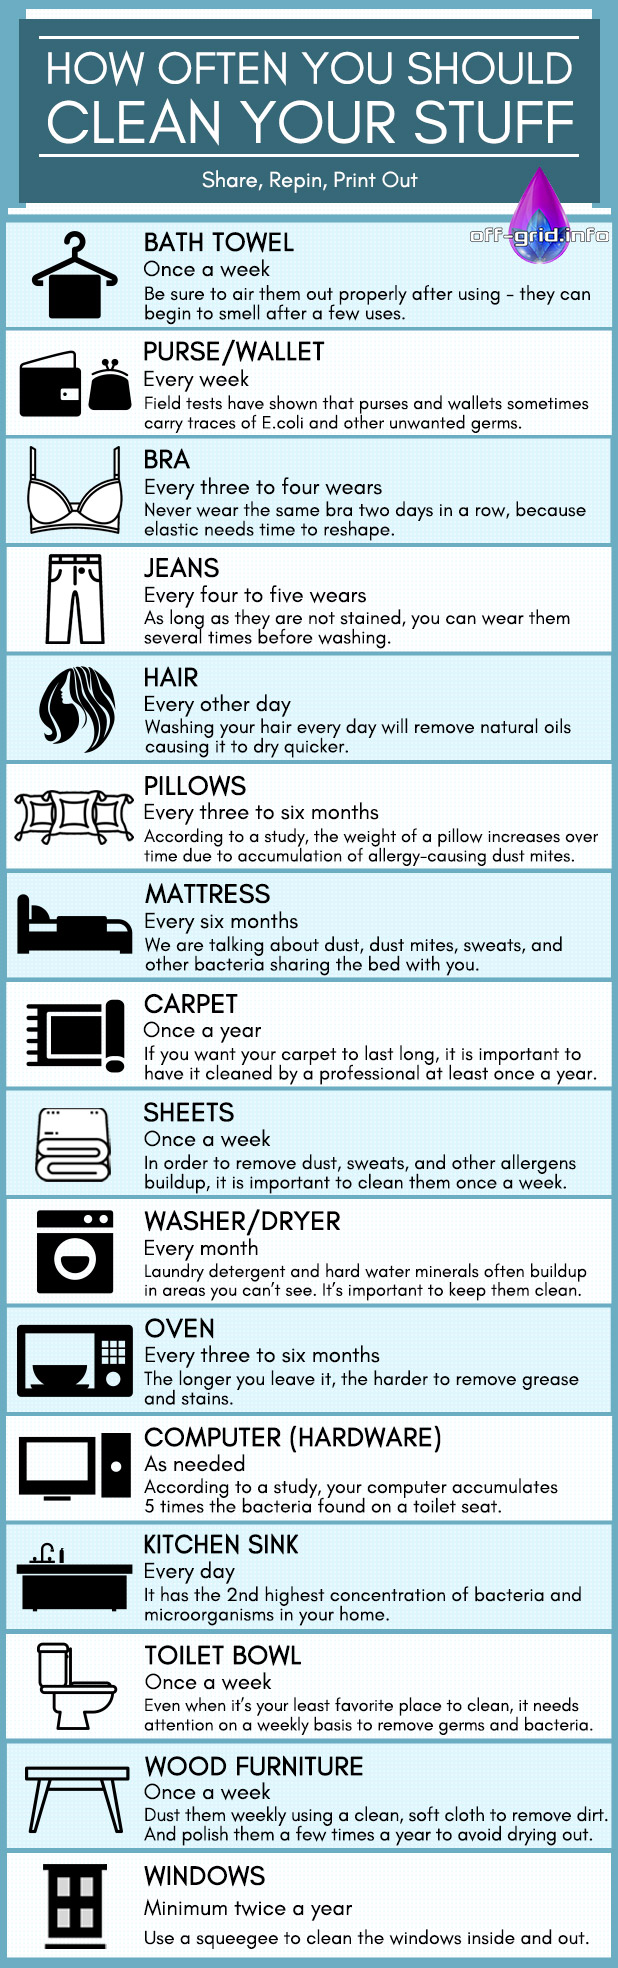 How Often You Should Clean Your Stuff